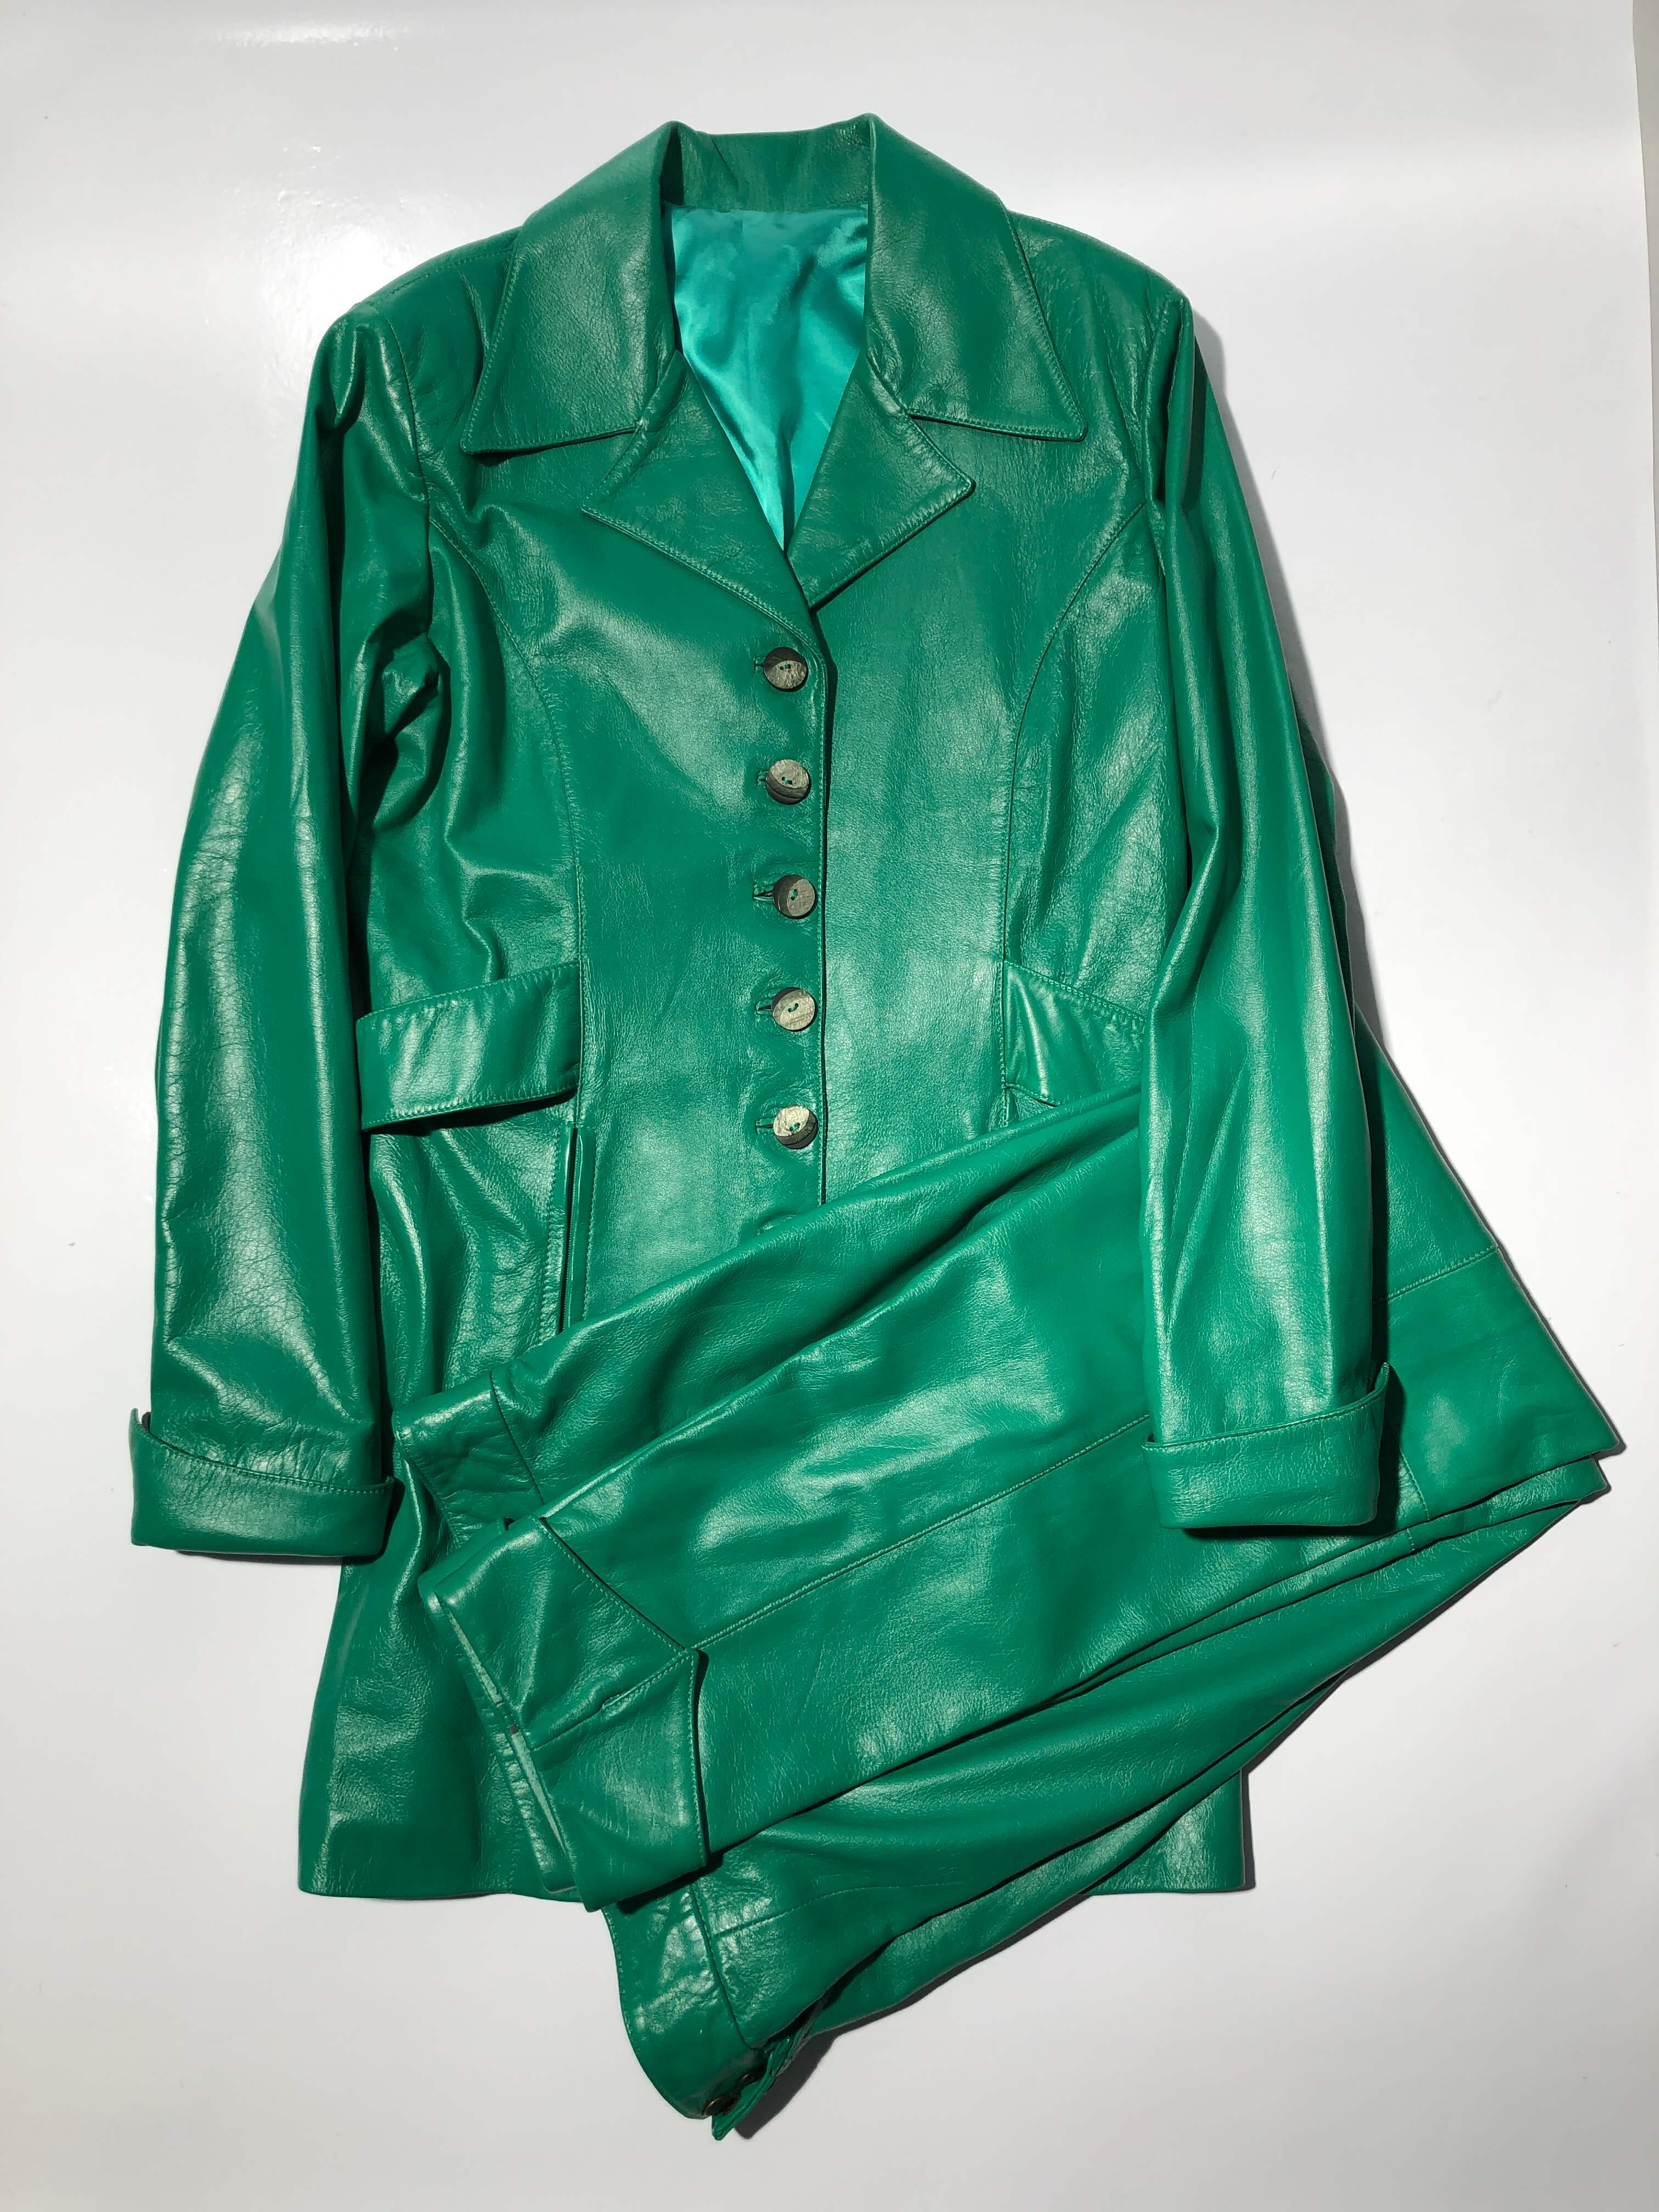 north beach leather green suit